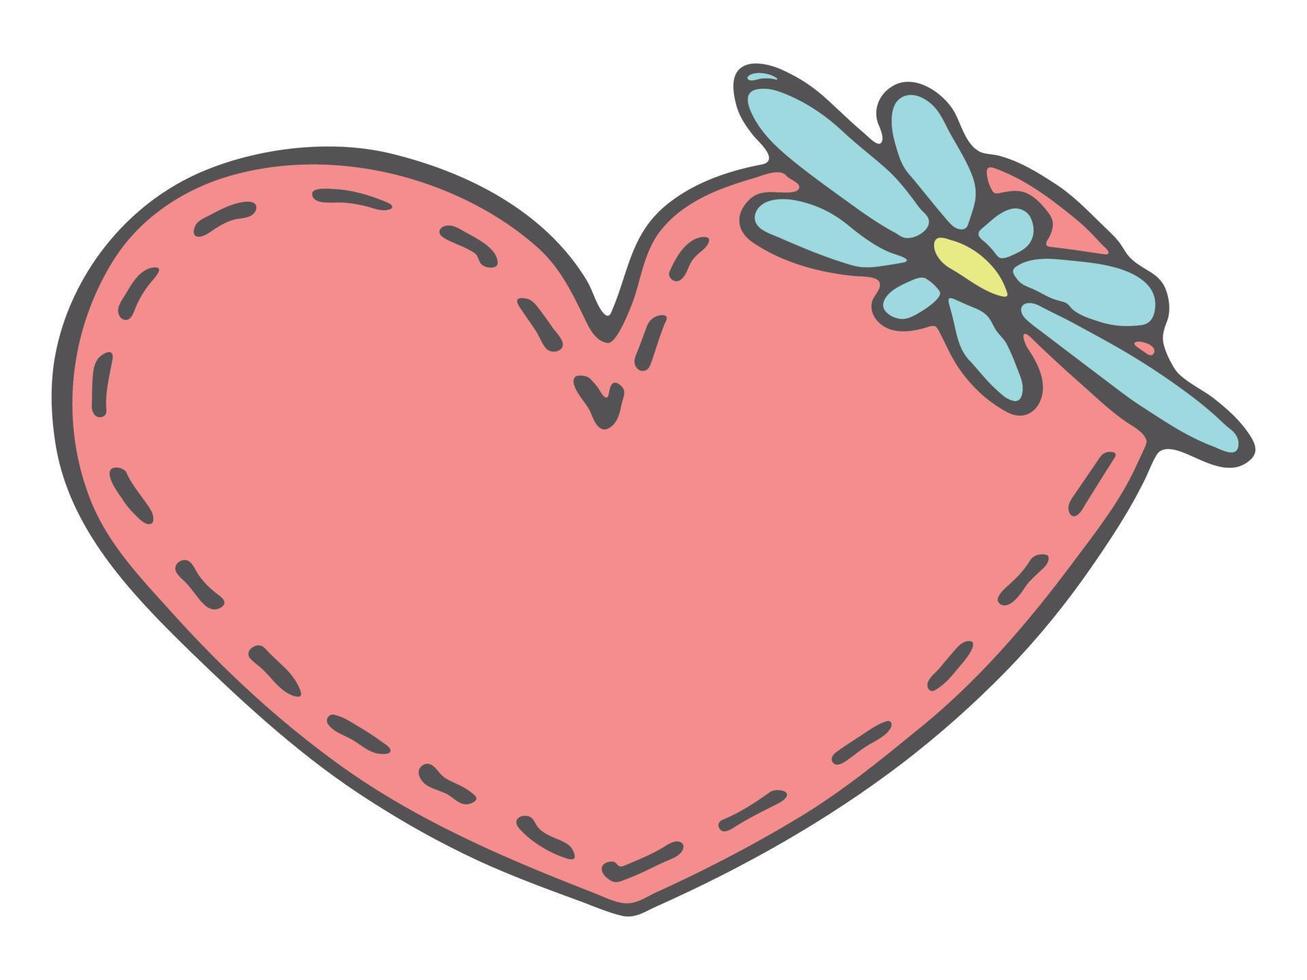 Simple hand drawn heart illustration isolated on a white background. Cute valentine's day heart doodle. vector